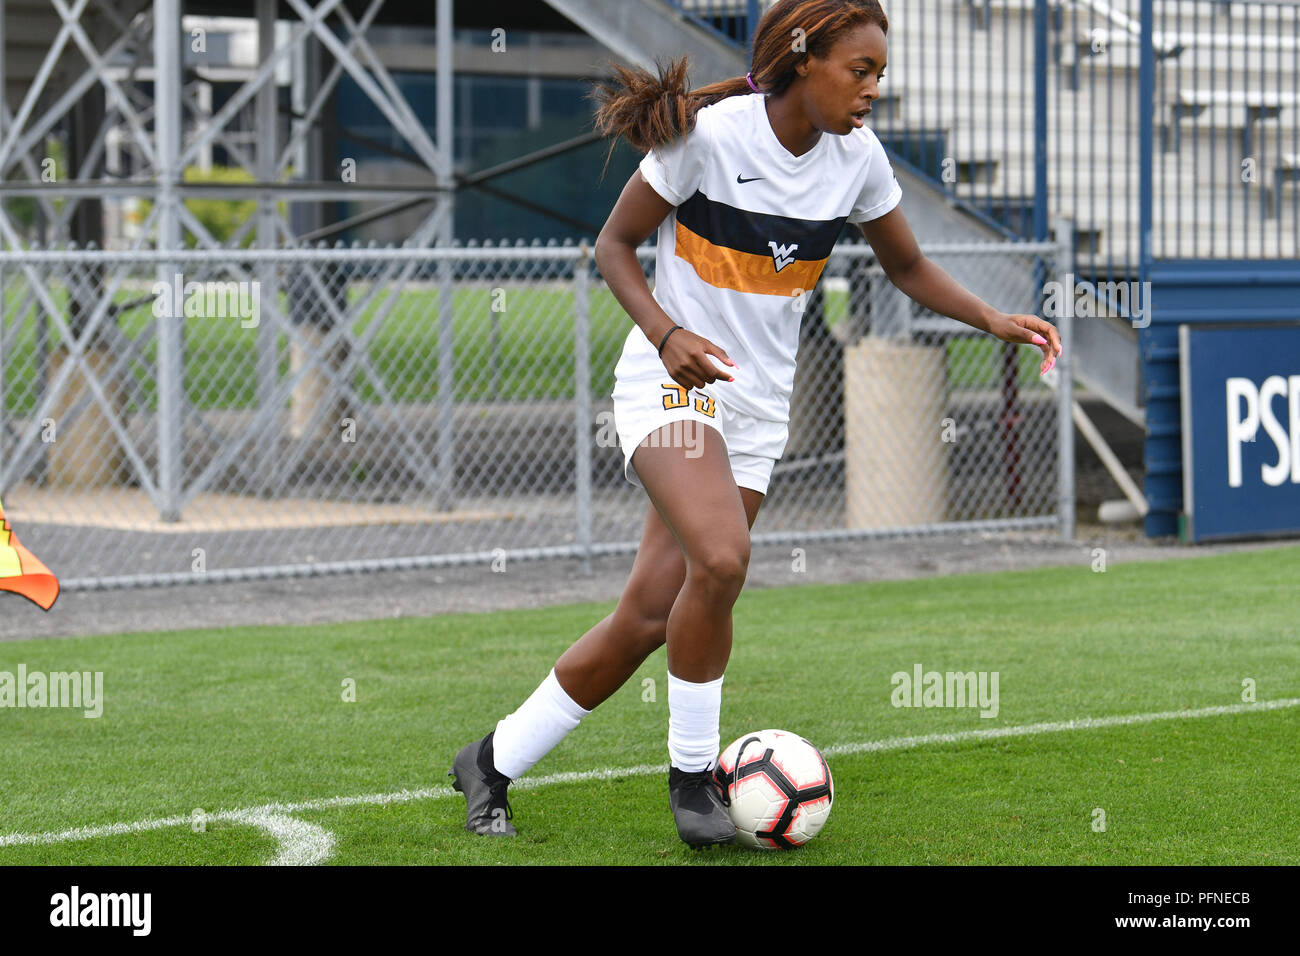 University Park, Pennsylvania, USA. 19th Aug, 2018. WVU women's soccer player SH'NIA GORDON (99) plays the ball out of the corner during the NCAA women's soccer match played at Jeffrey Field in University Park, PA. WVU and Arkansas finished in a 1-1 draw after two overtimes. Credit: Ken Inness/ZUMA Wire/Alamy Live News Stock Photo